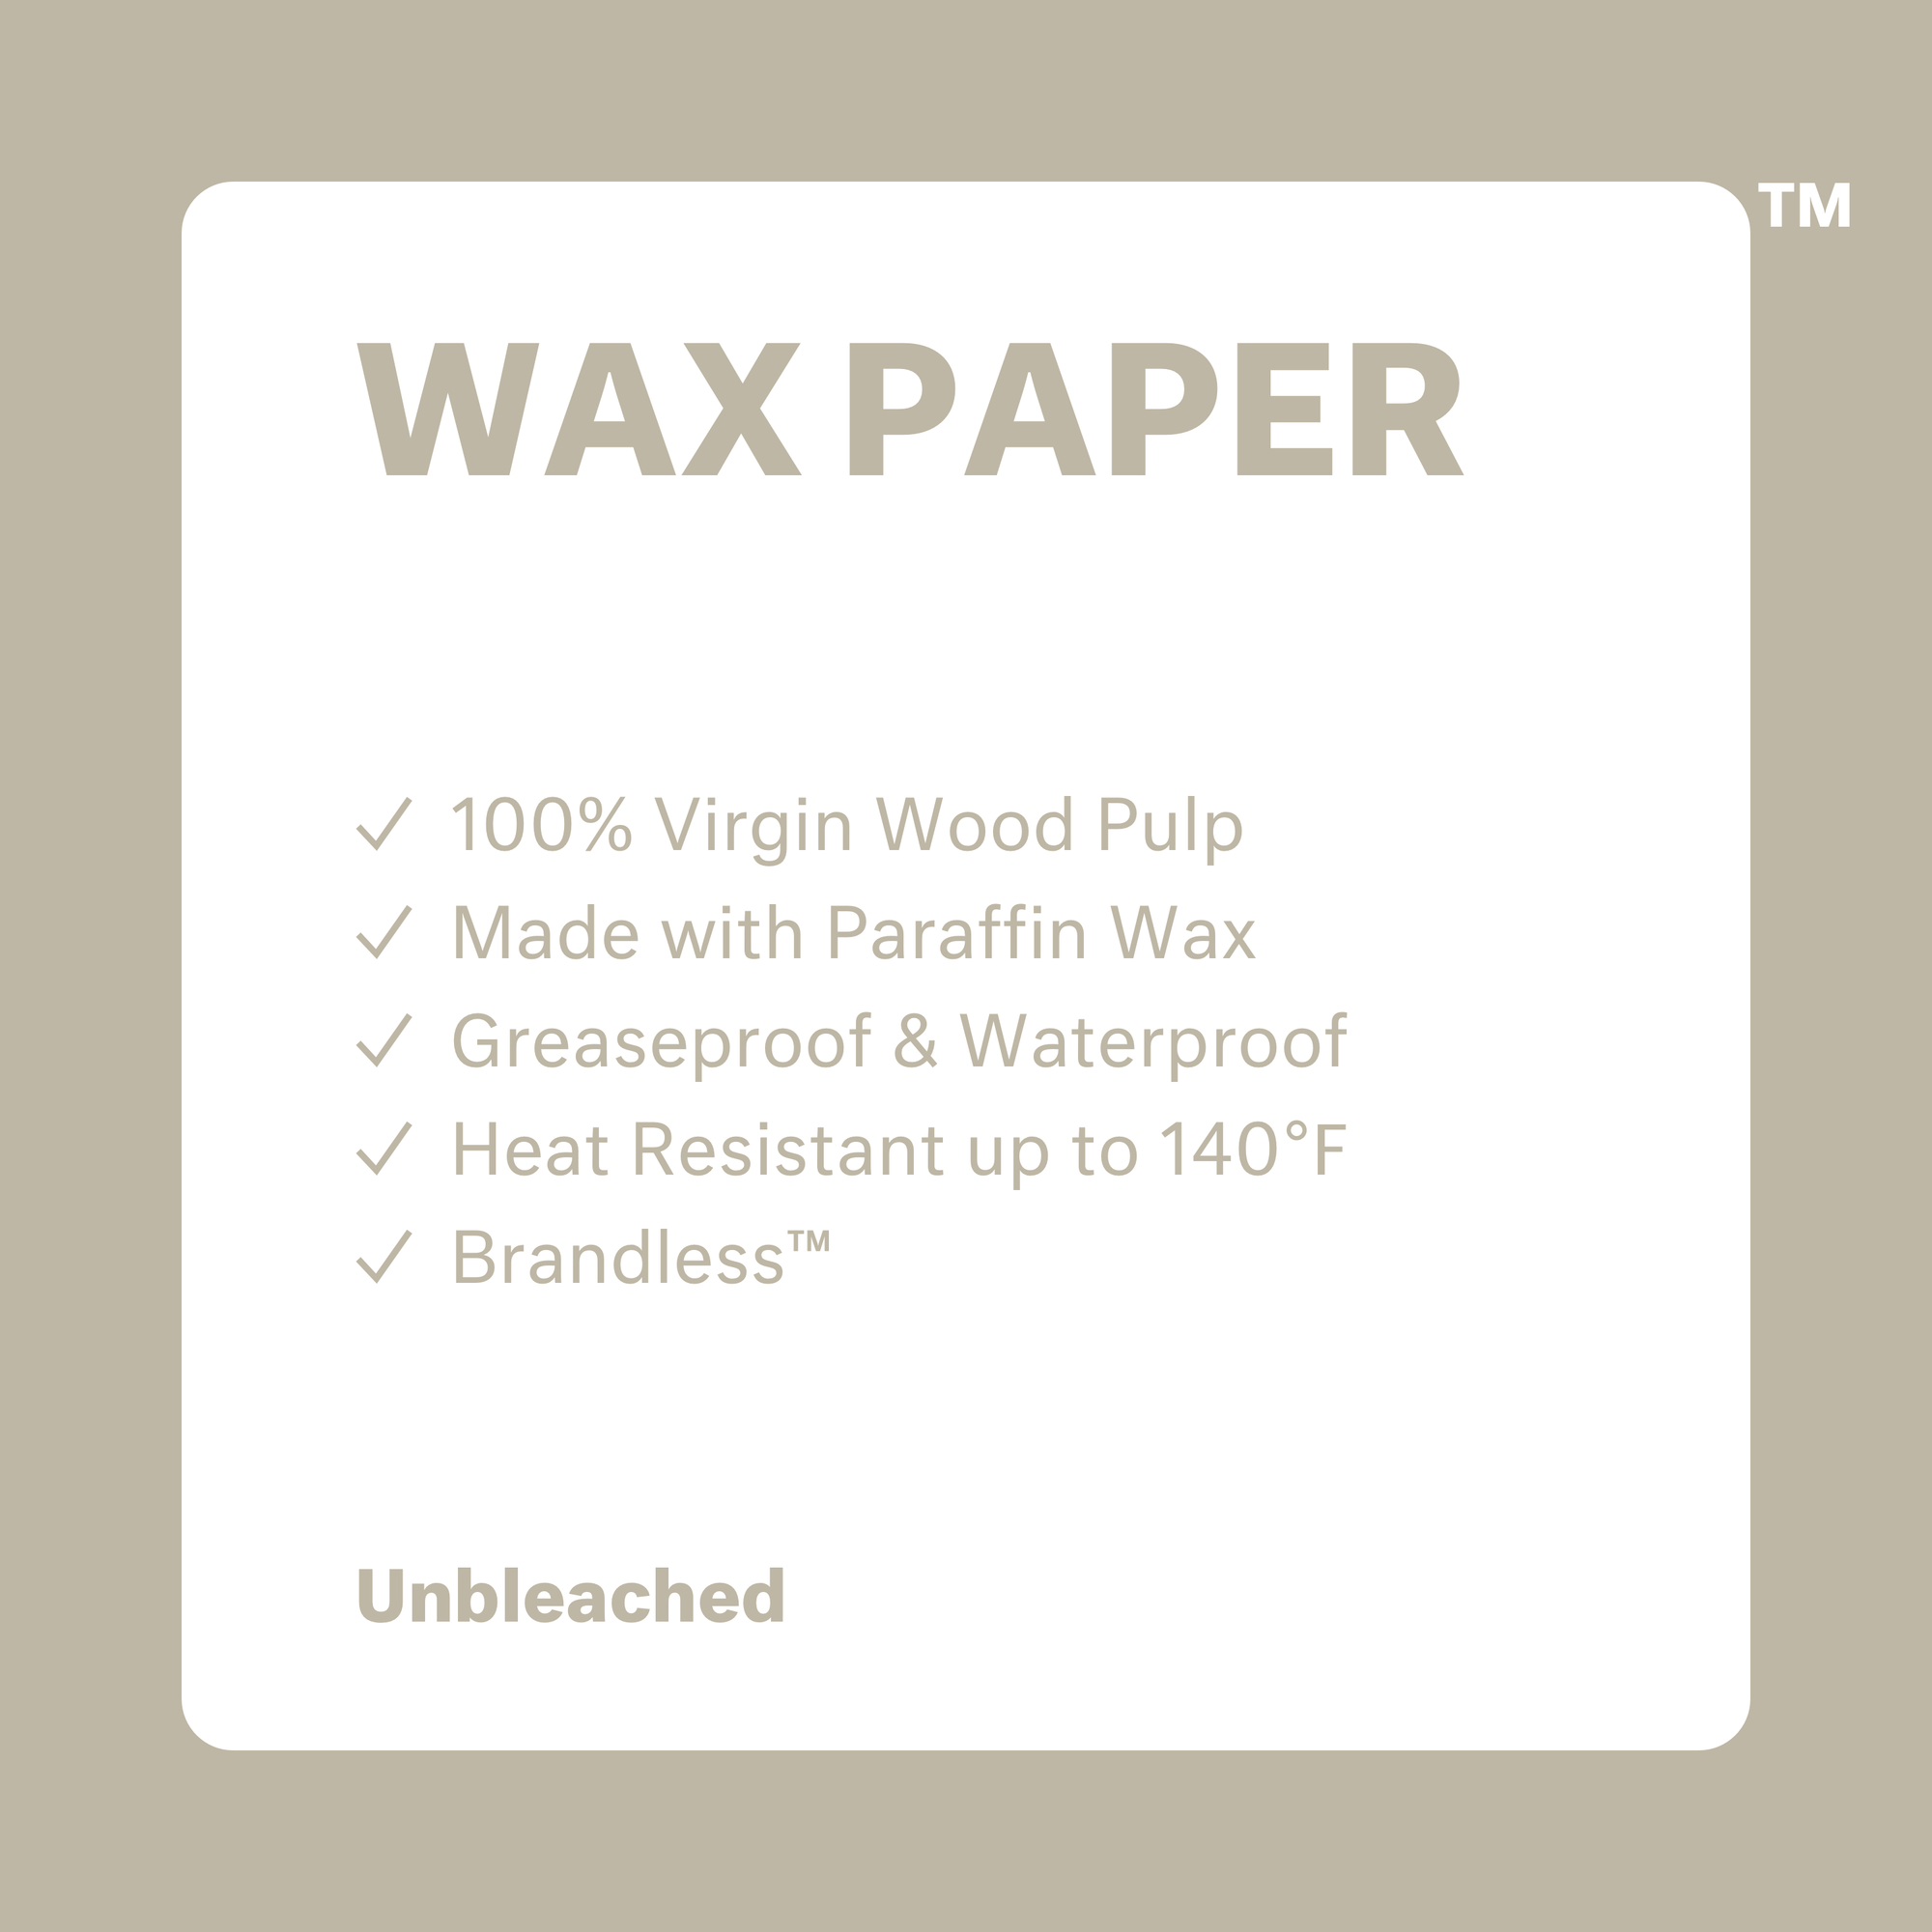 Product photo, front of box showing the product name: wax paper.